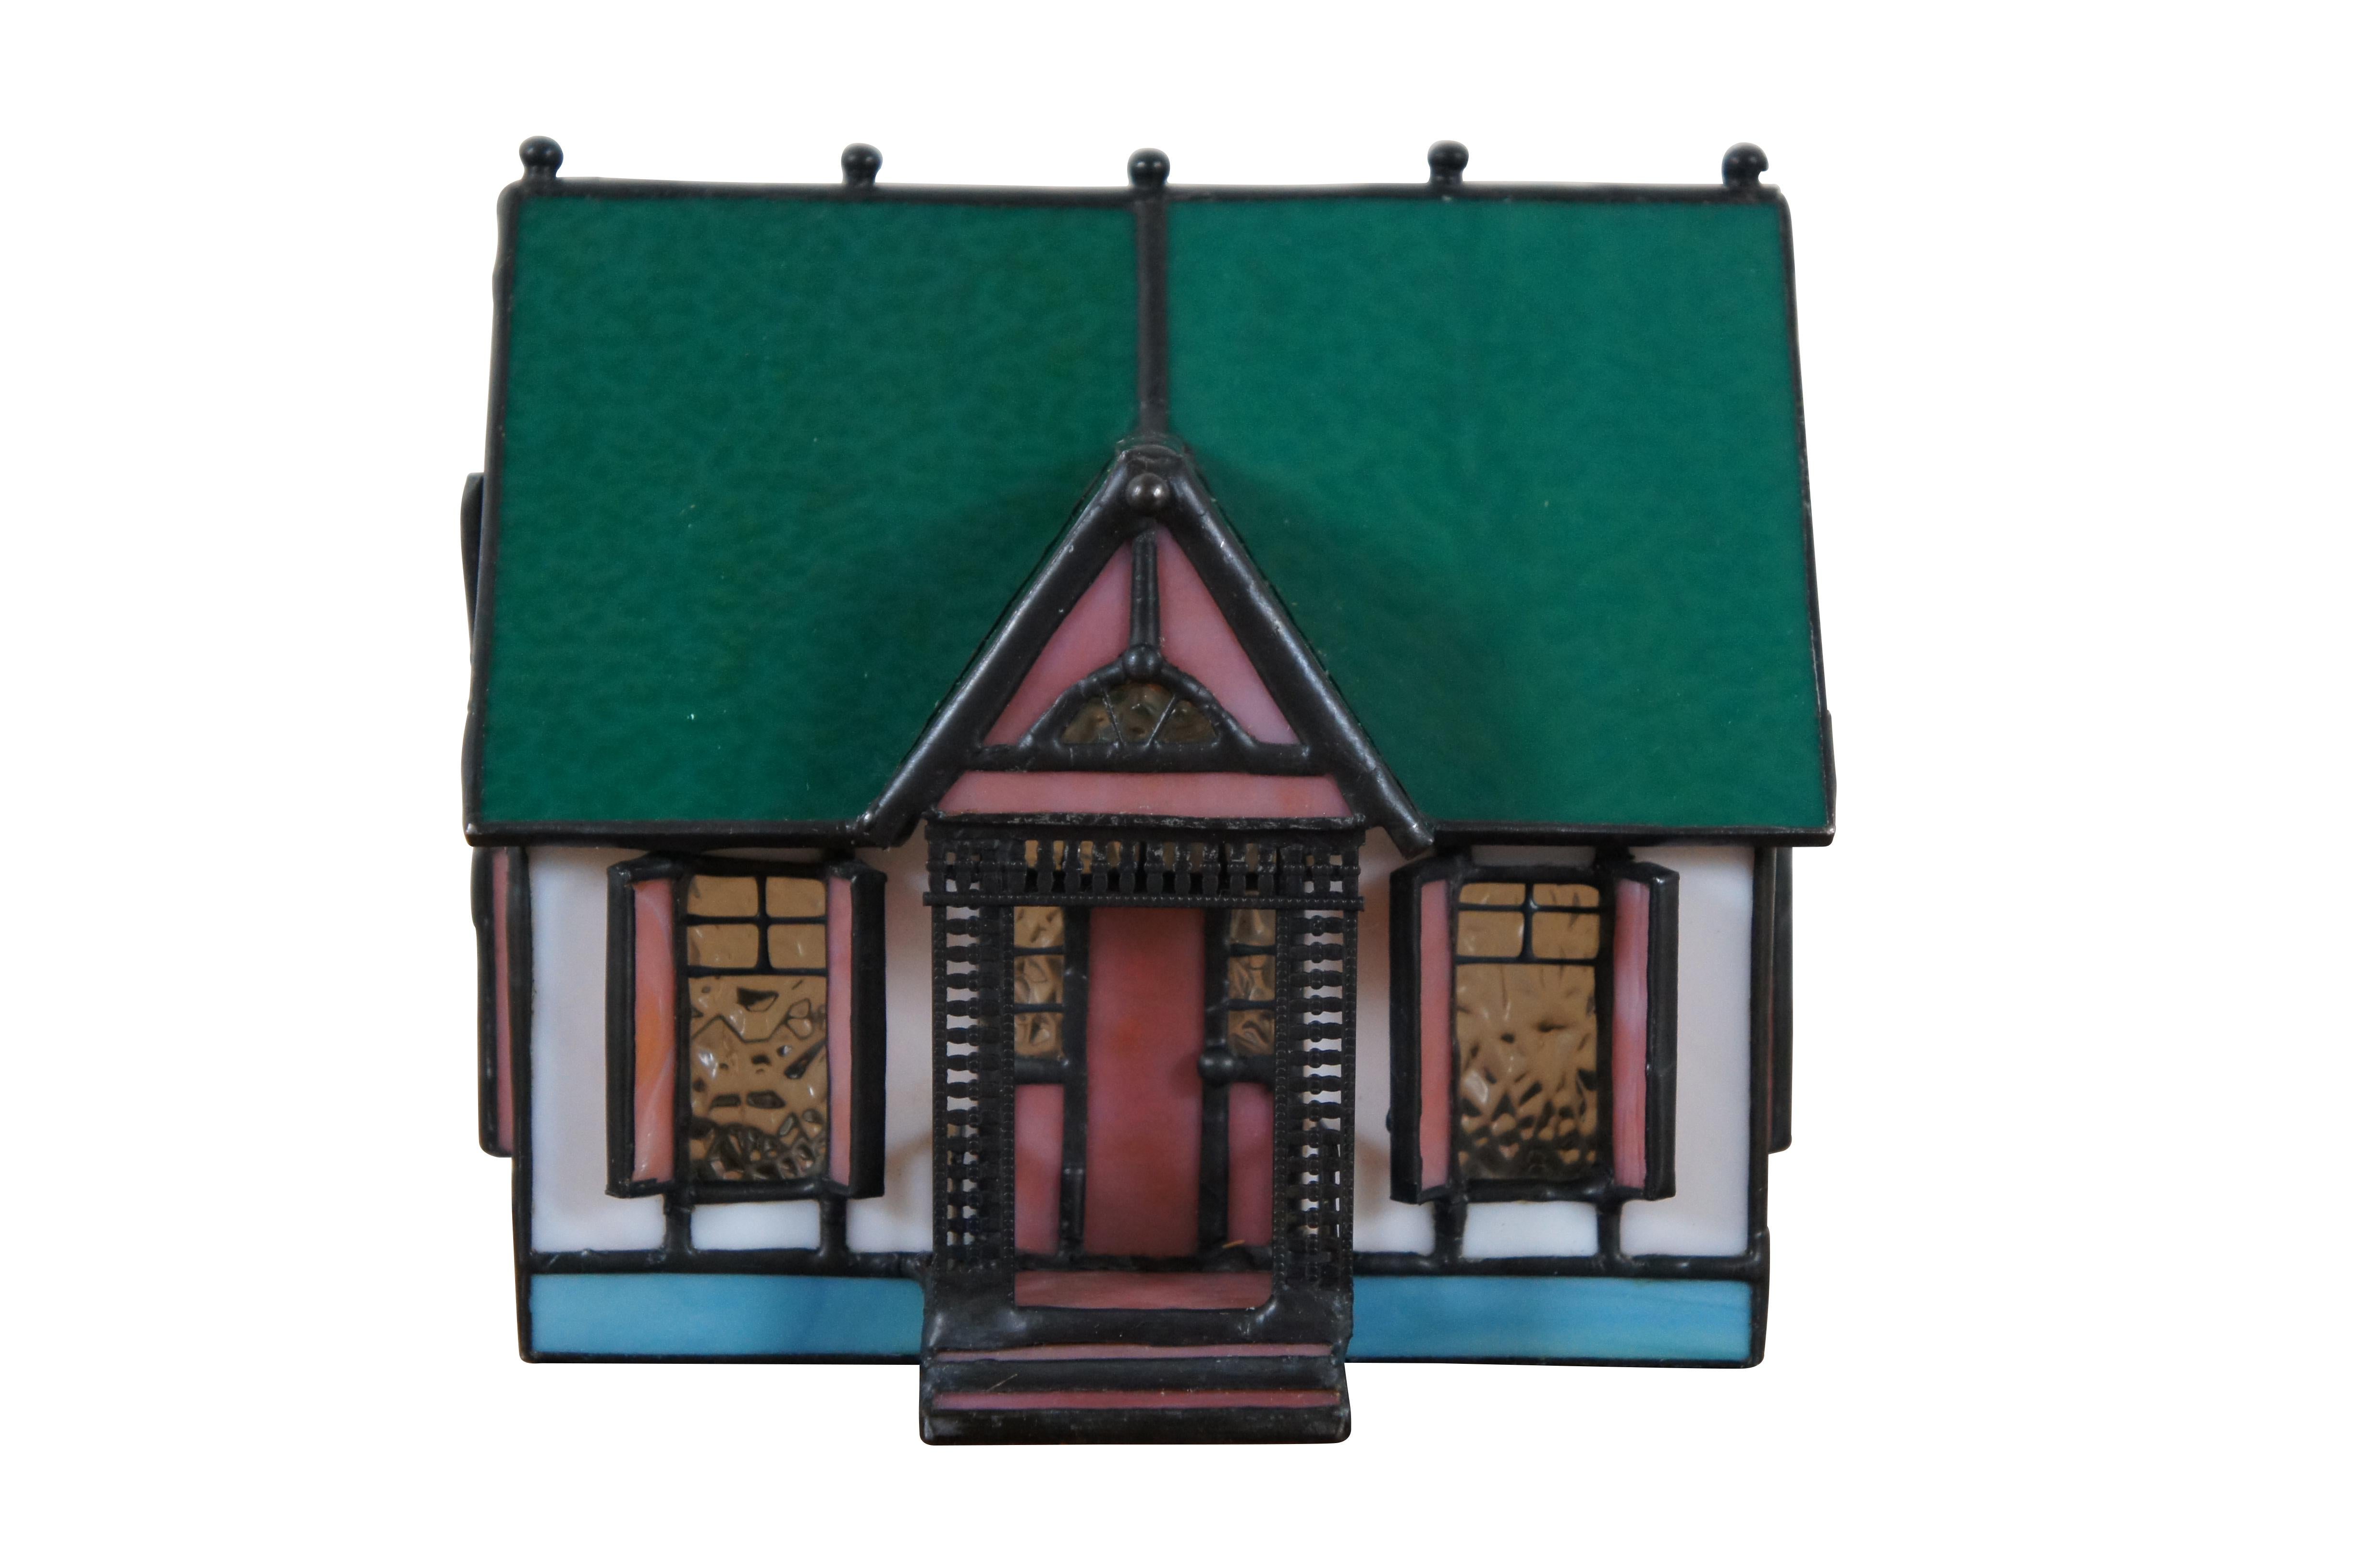 Vintage stained glass night light or lamp featuring a Victorian home or cottage with porch, shutters and green roof with finials.

Dimensions:
5.25